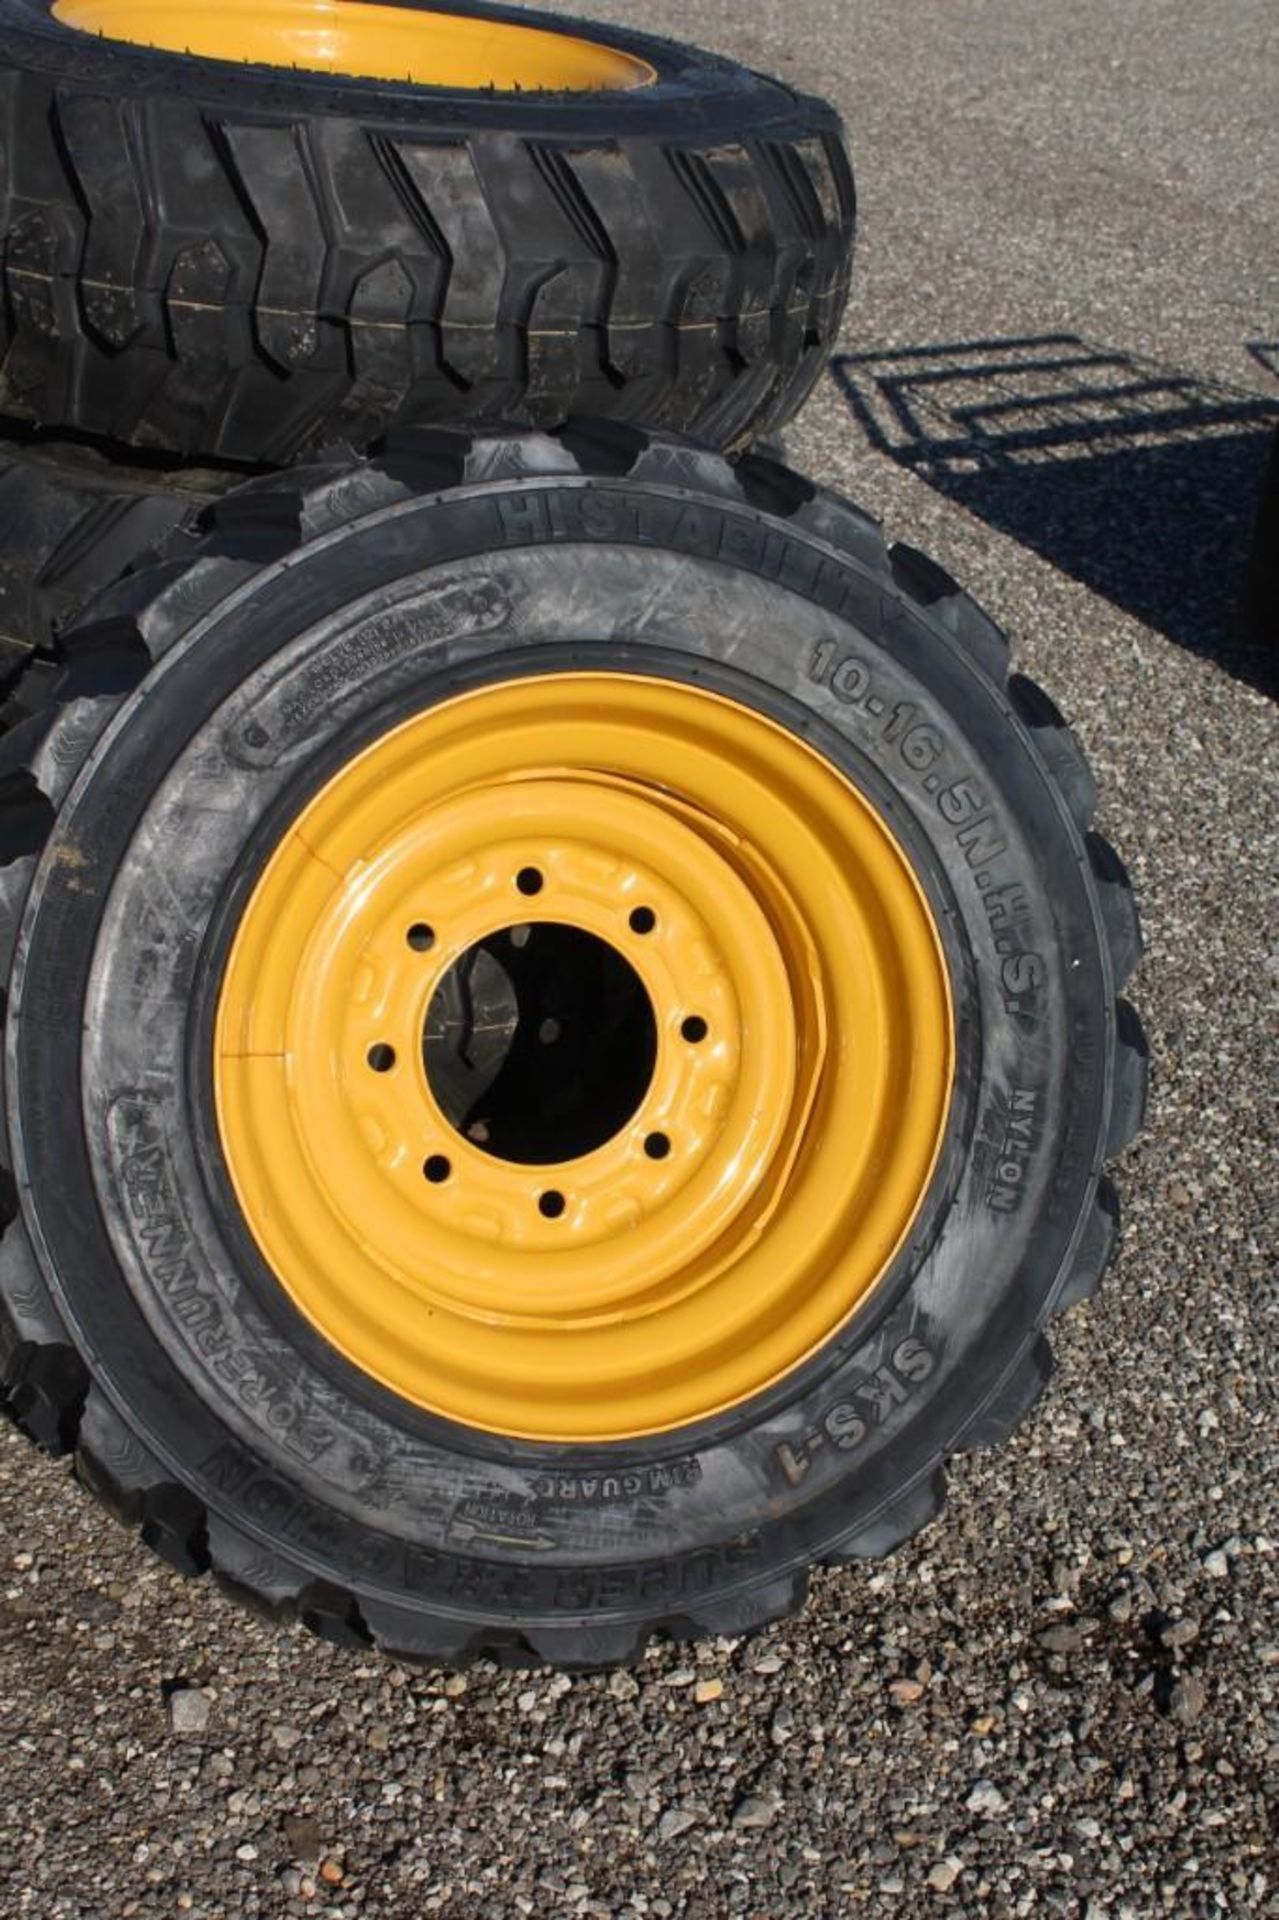 New Skid Loader Wheels and Tires. - Image 2 of 3